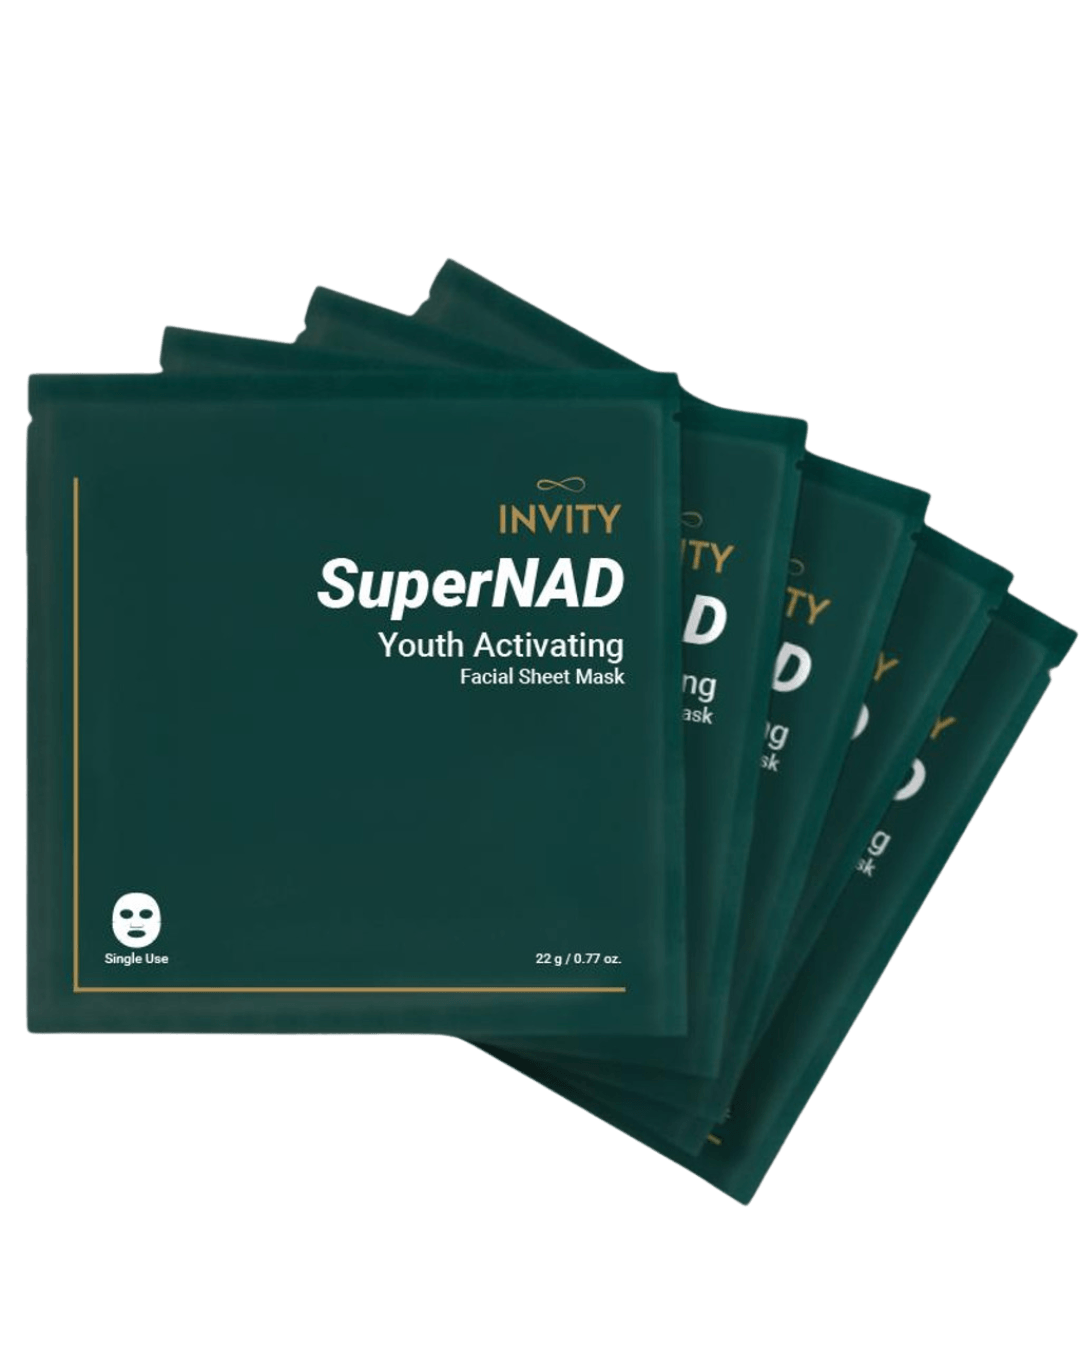 Daily Vanity Beauty Awards 2024 Best Skincare Invity SuperNAD Youth Activating Facial Sheet Mask Voted By Beauty Experts